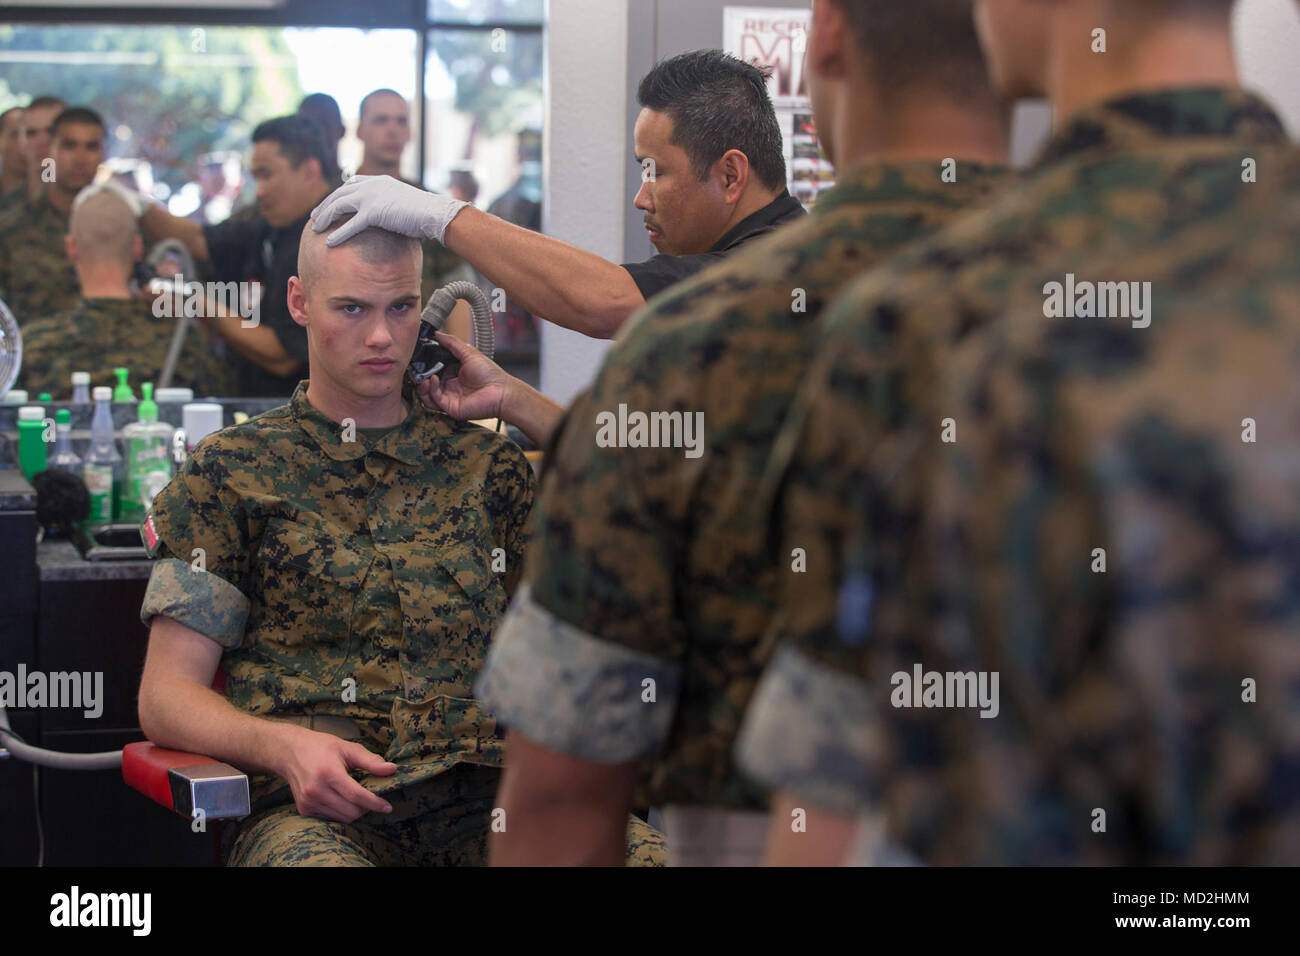 Recruits from Delta Company, 1st Recruit Training Battalion, wait to receive haircuts at Marine Corps Recruit Depot San Diego, March 27. Recruits receive haircuts regularly during training to create uniformity and promote camaraderie. Annually, more than 17,000 males recruited from the Western Recruiting Region are trained MCRD San Diego. Mike Company is scheduled to graduate June 1. Stock Photo